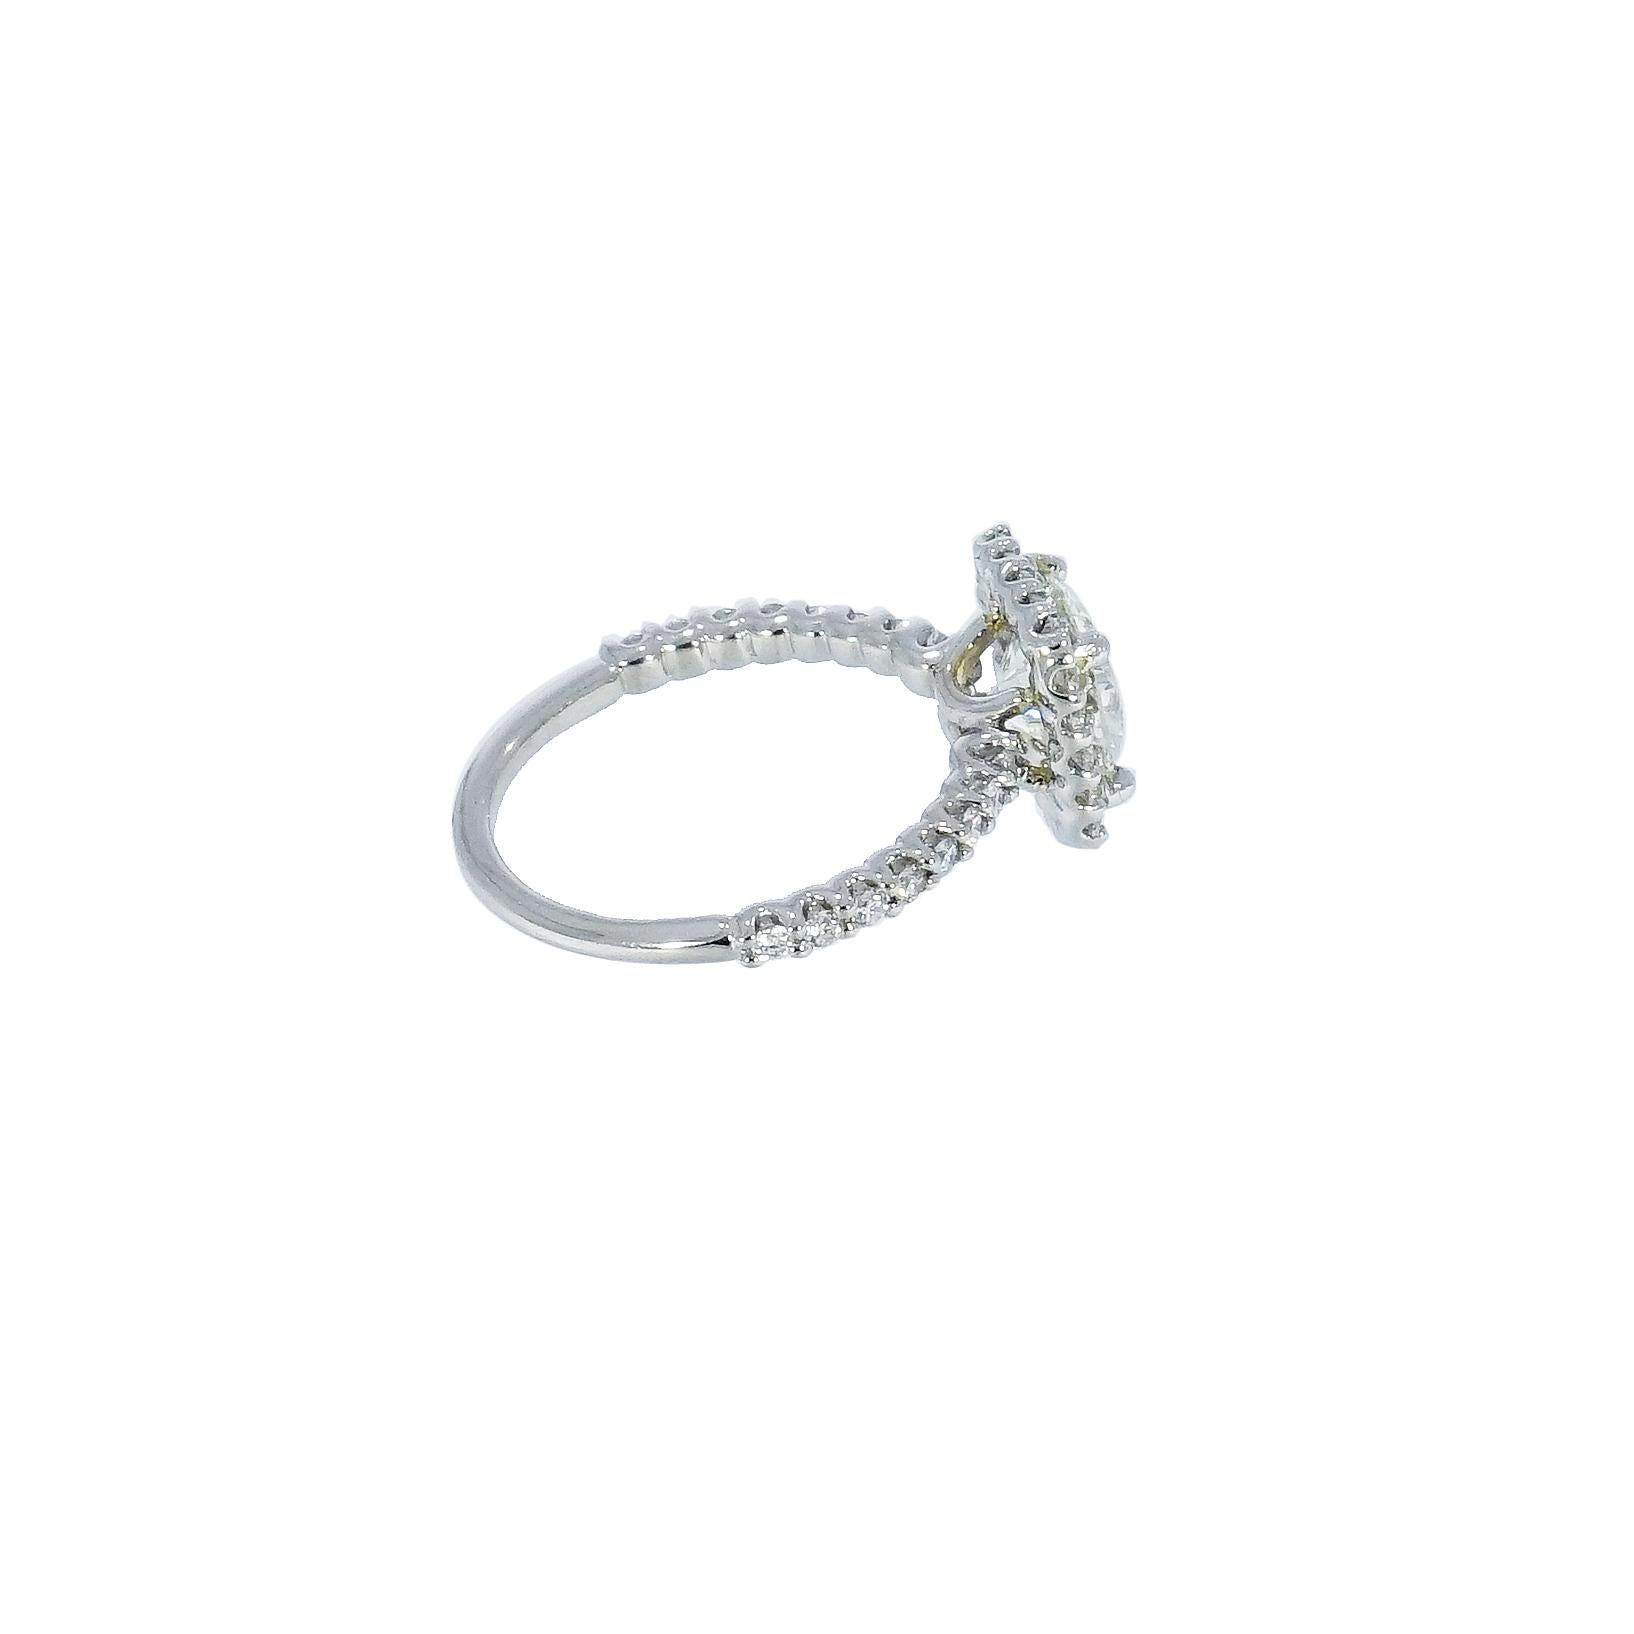 This gorgeous and feminine cushion shaped halo engagement ring includes a 1.58 carat Round Diamond center, J color, SI1 clarity, certified by EGL. 
The Platinum ring features a line of shimmering, round brilliant cut diamonds down both sides,